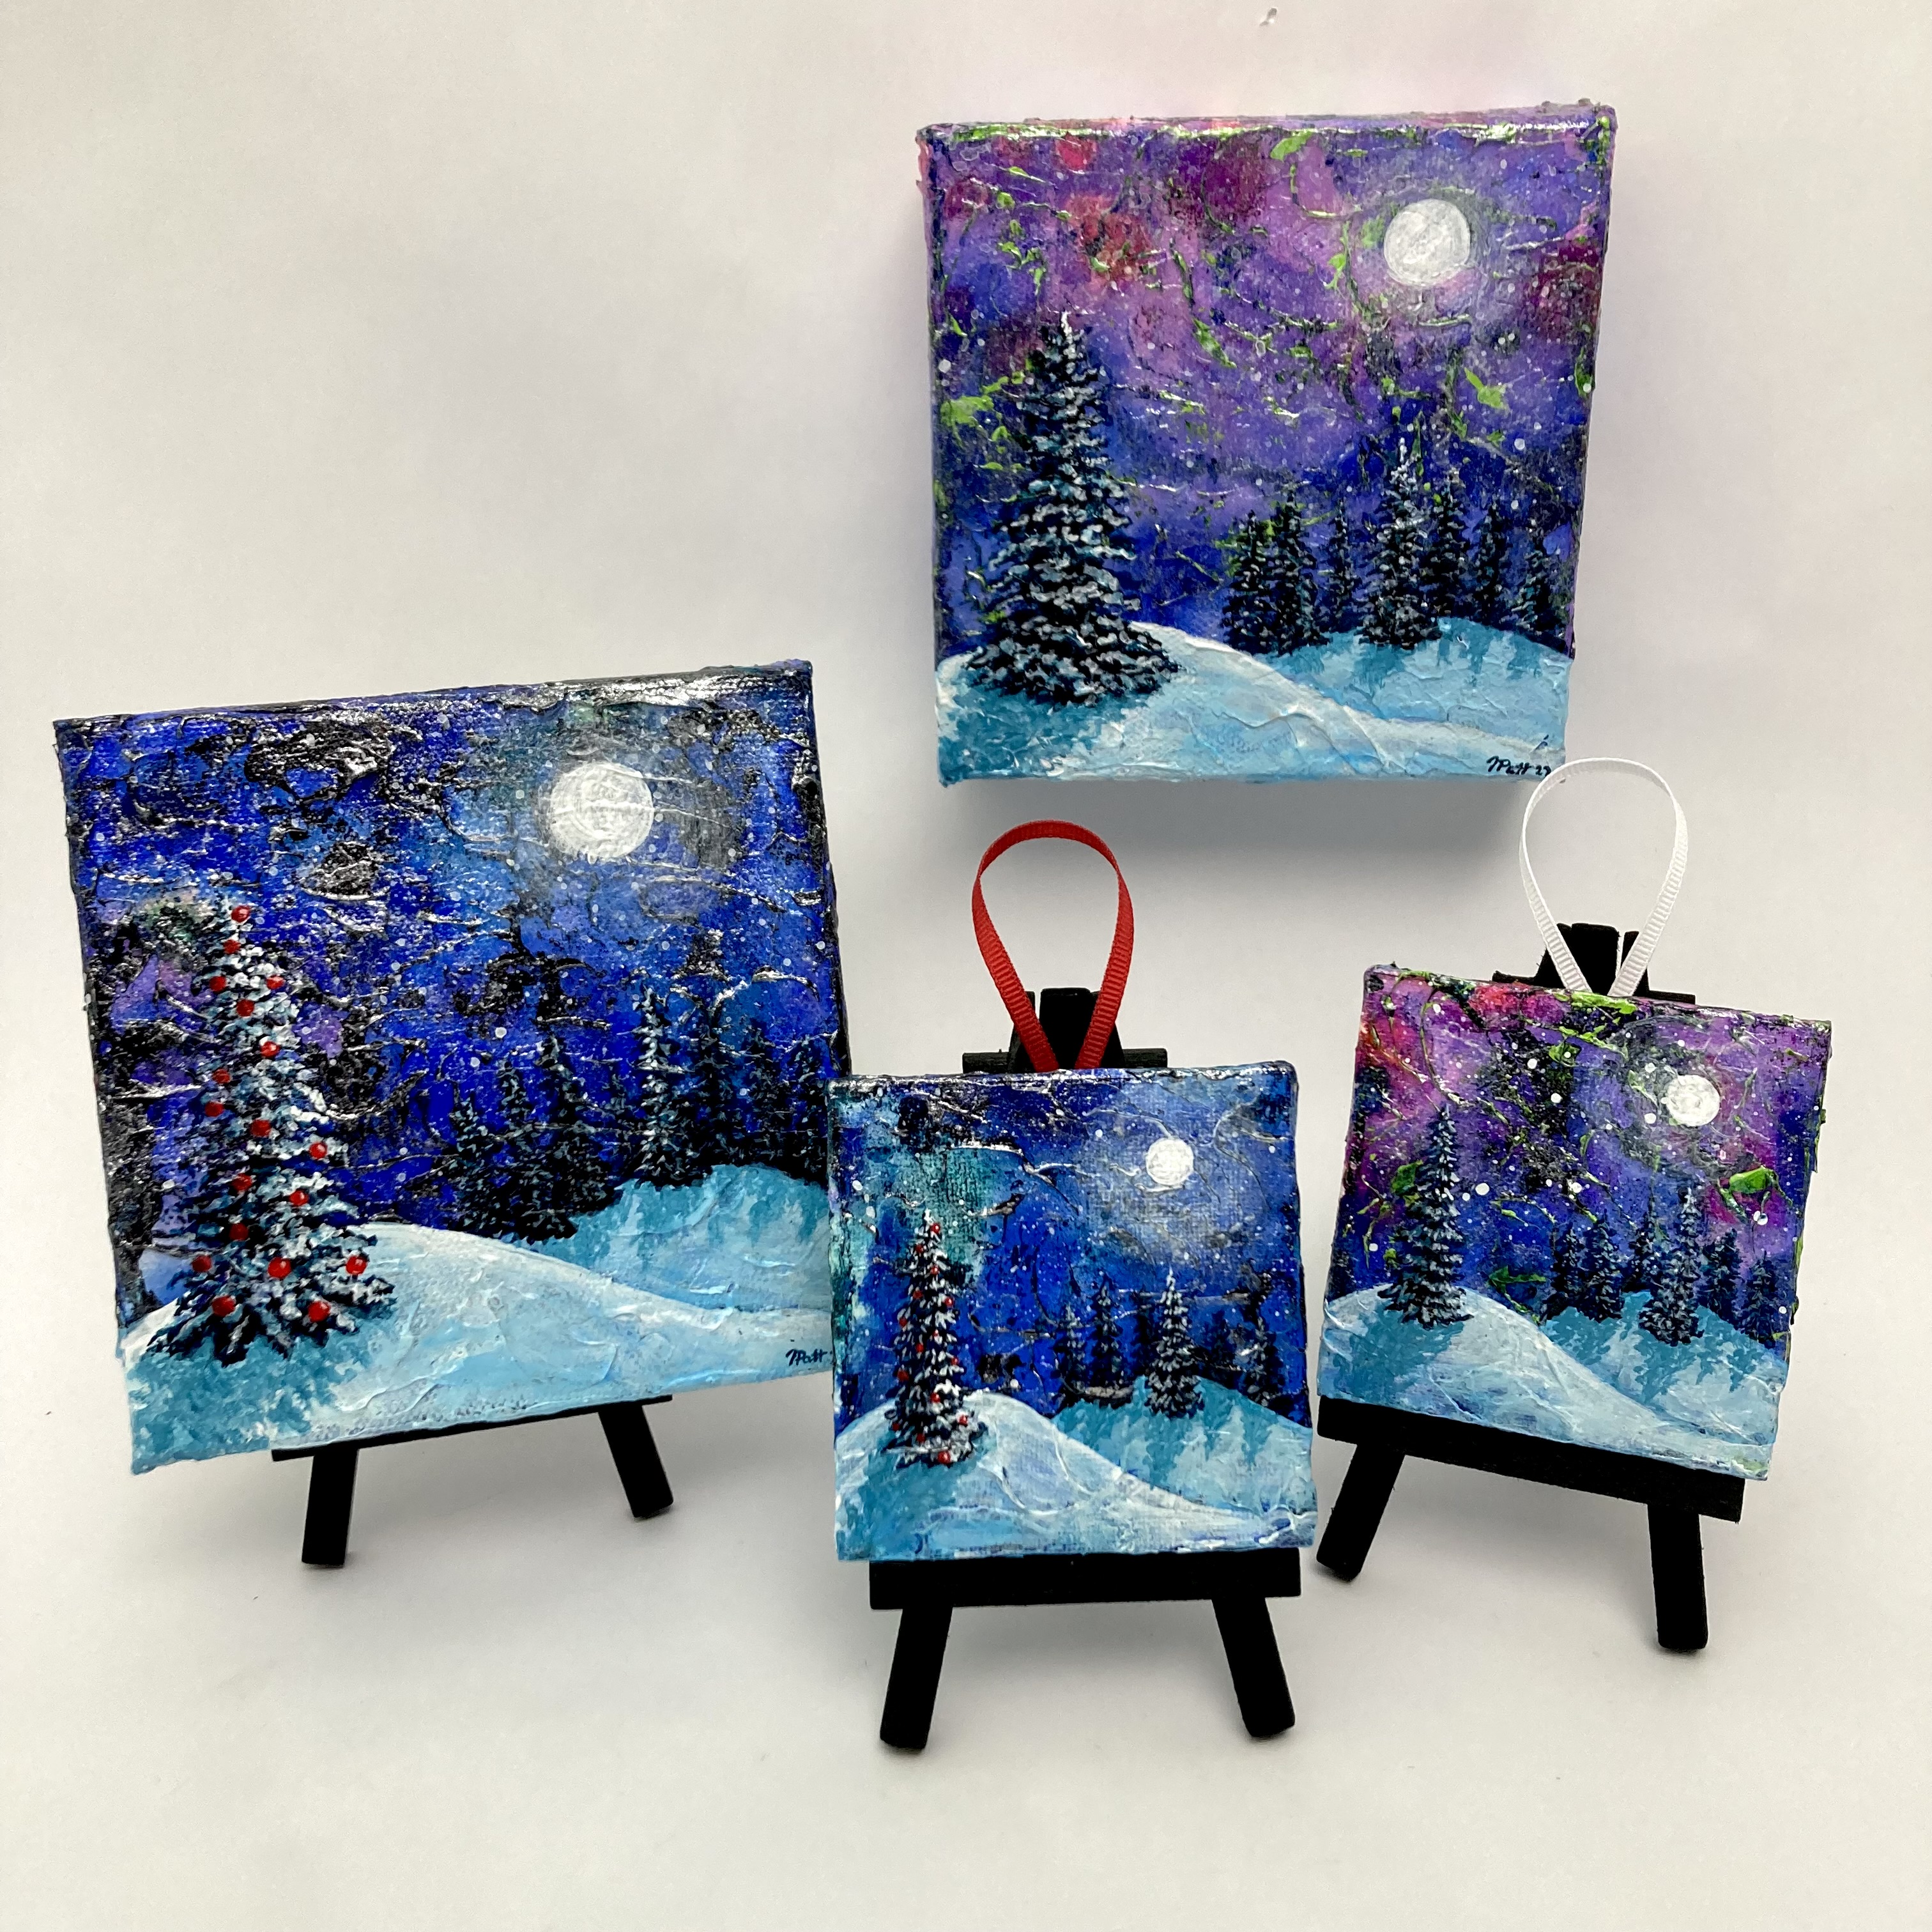 Four small canvases, featuring hand-painted winter scenes